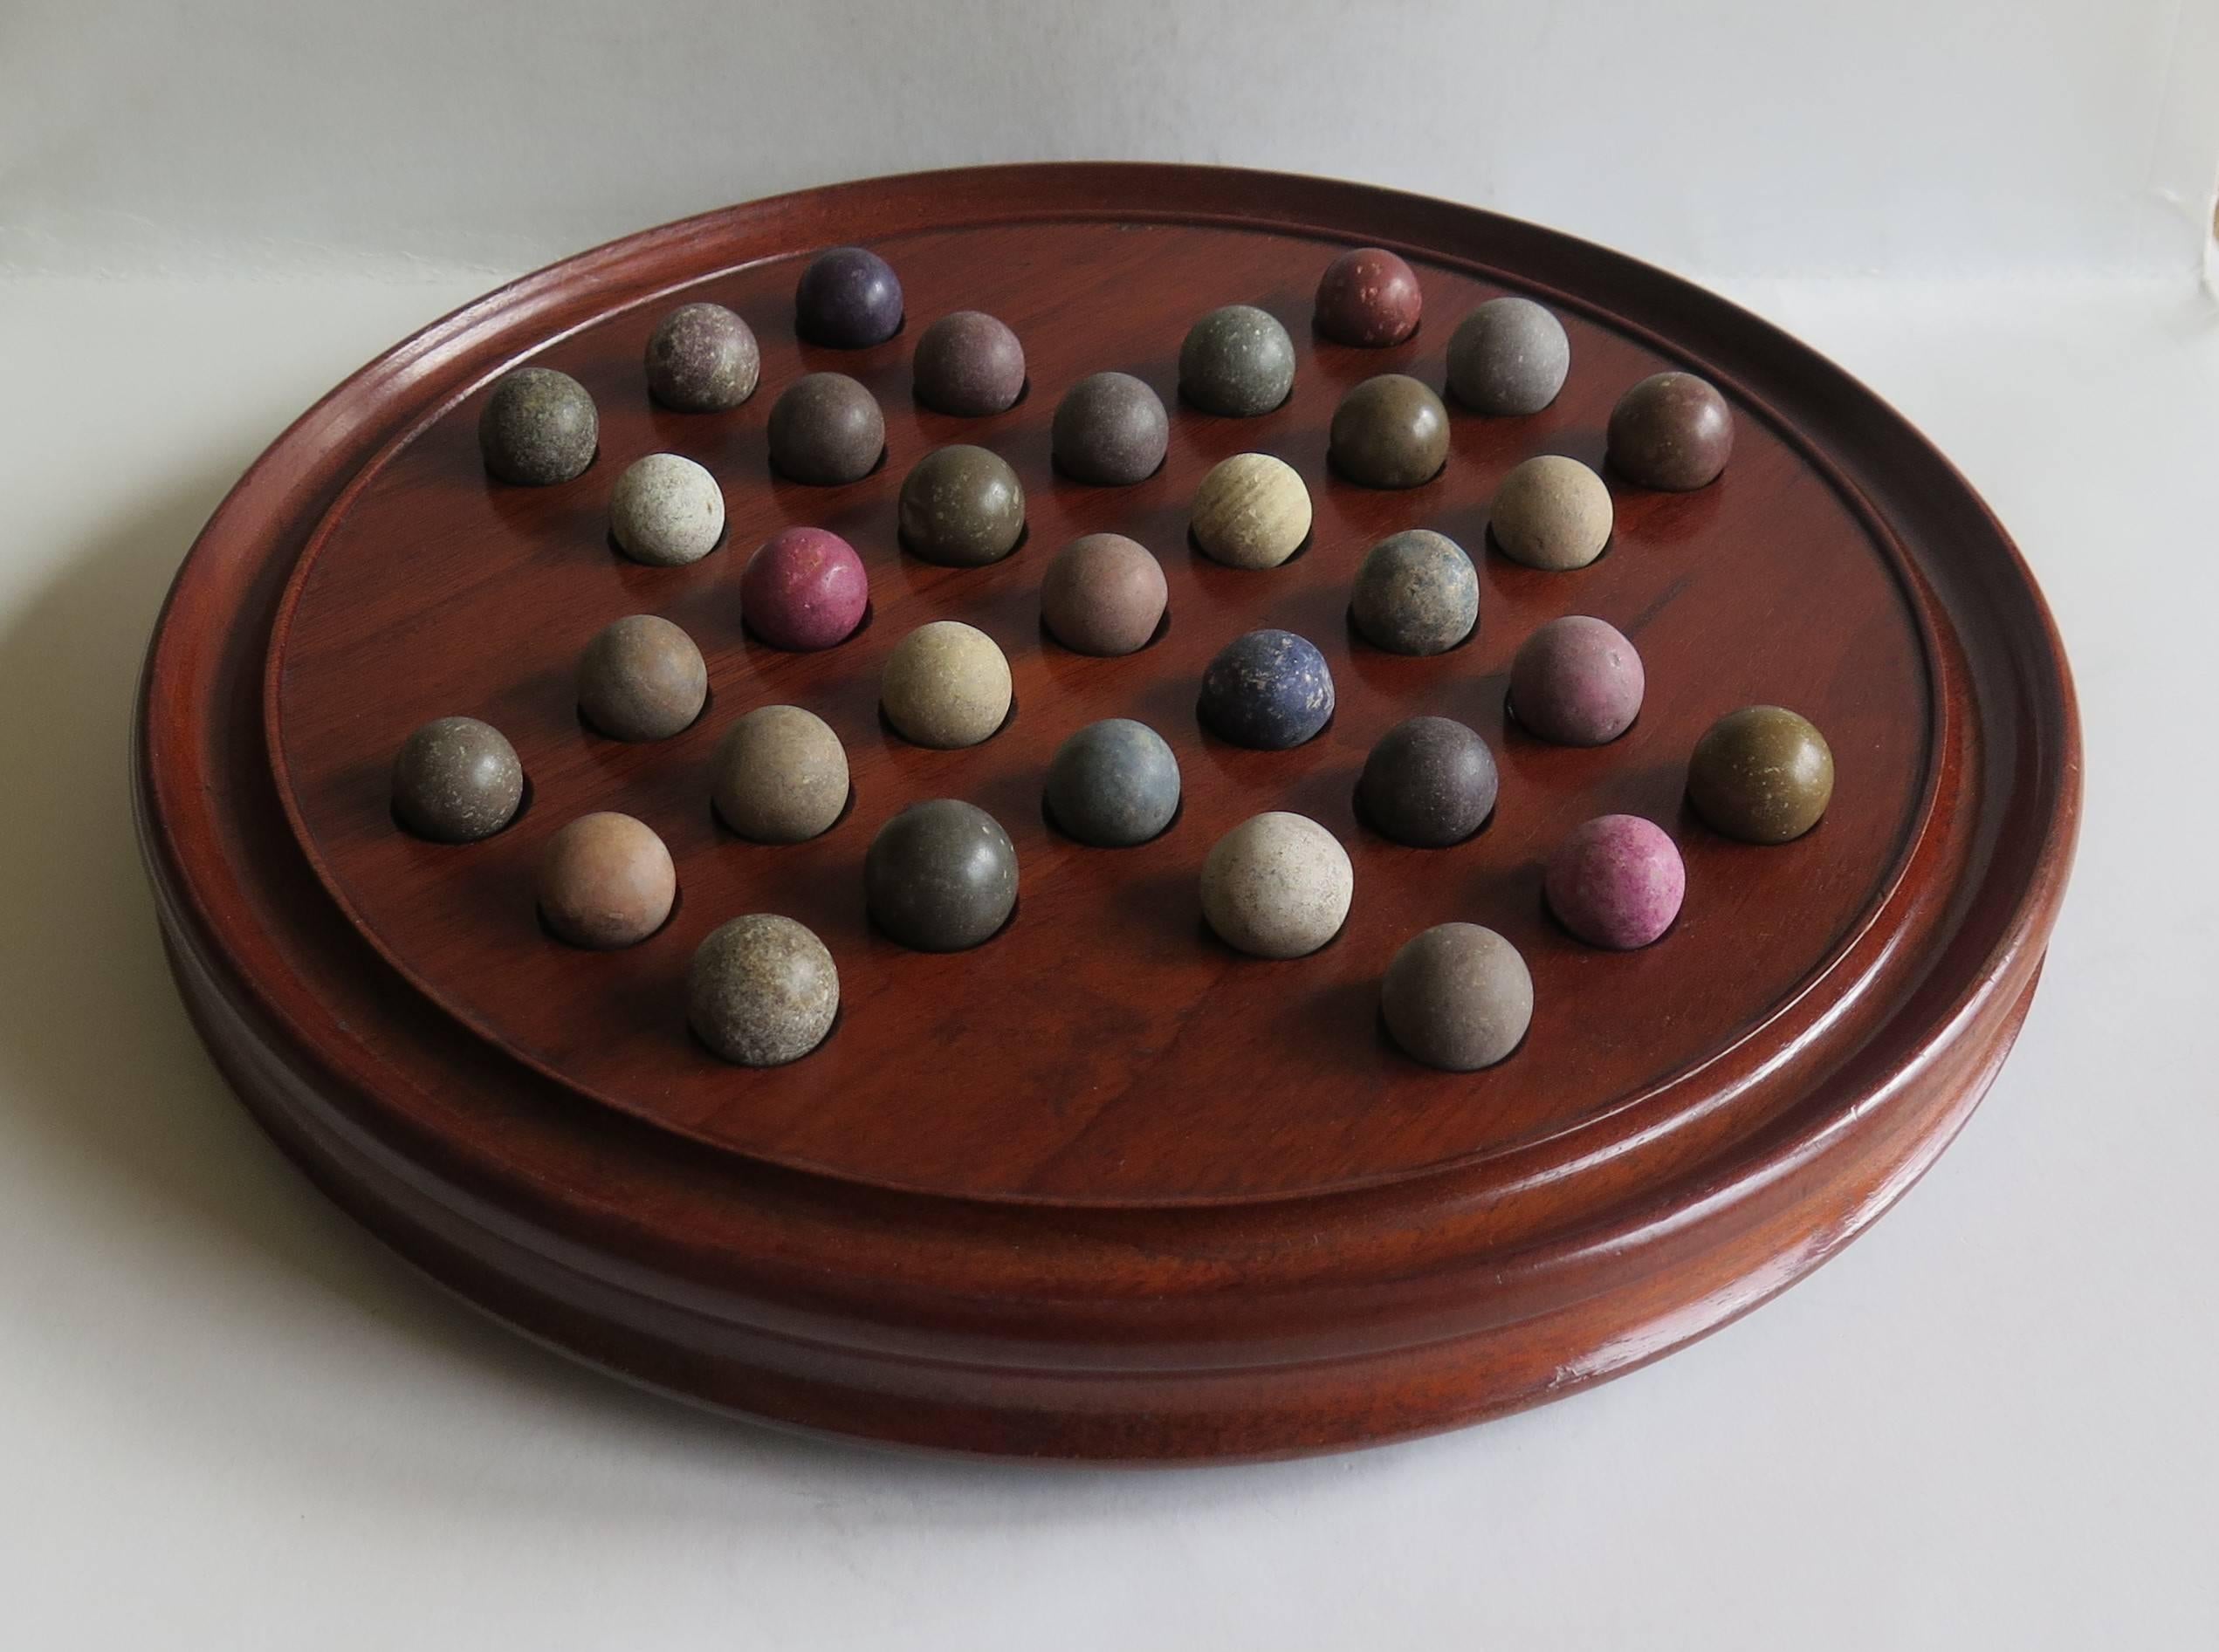 English 19th Century, Table Solitaire Marble Board Game, with 33 Handmade Early Marbles